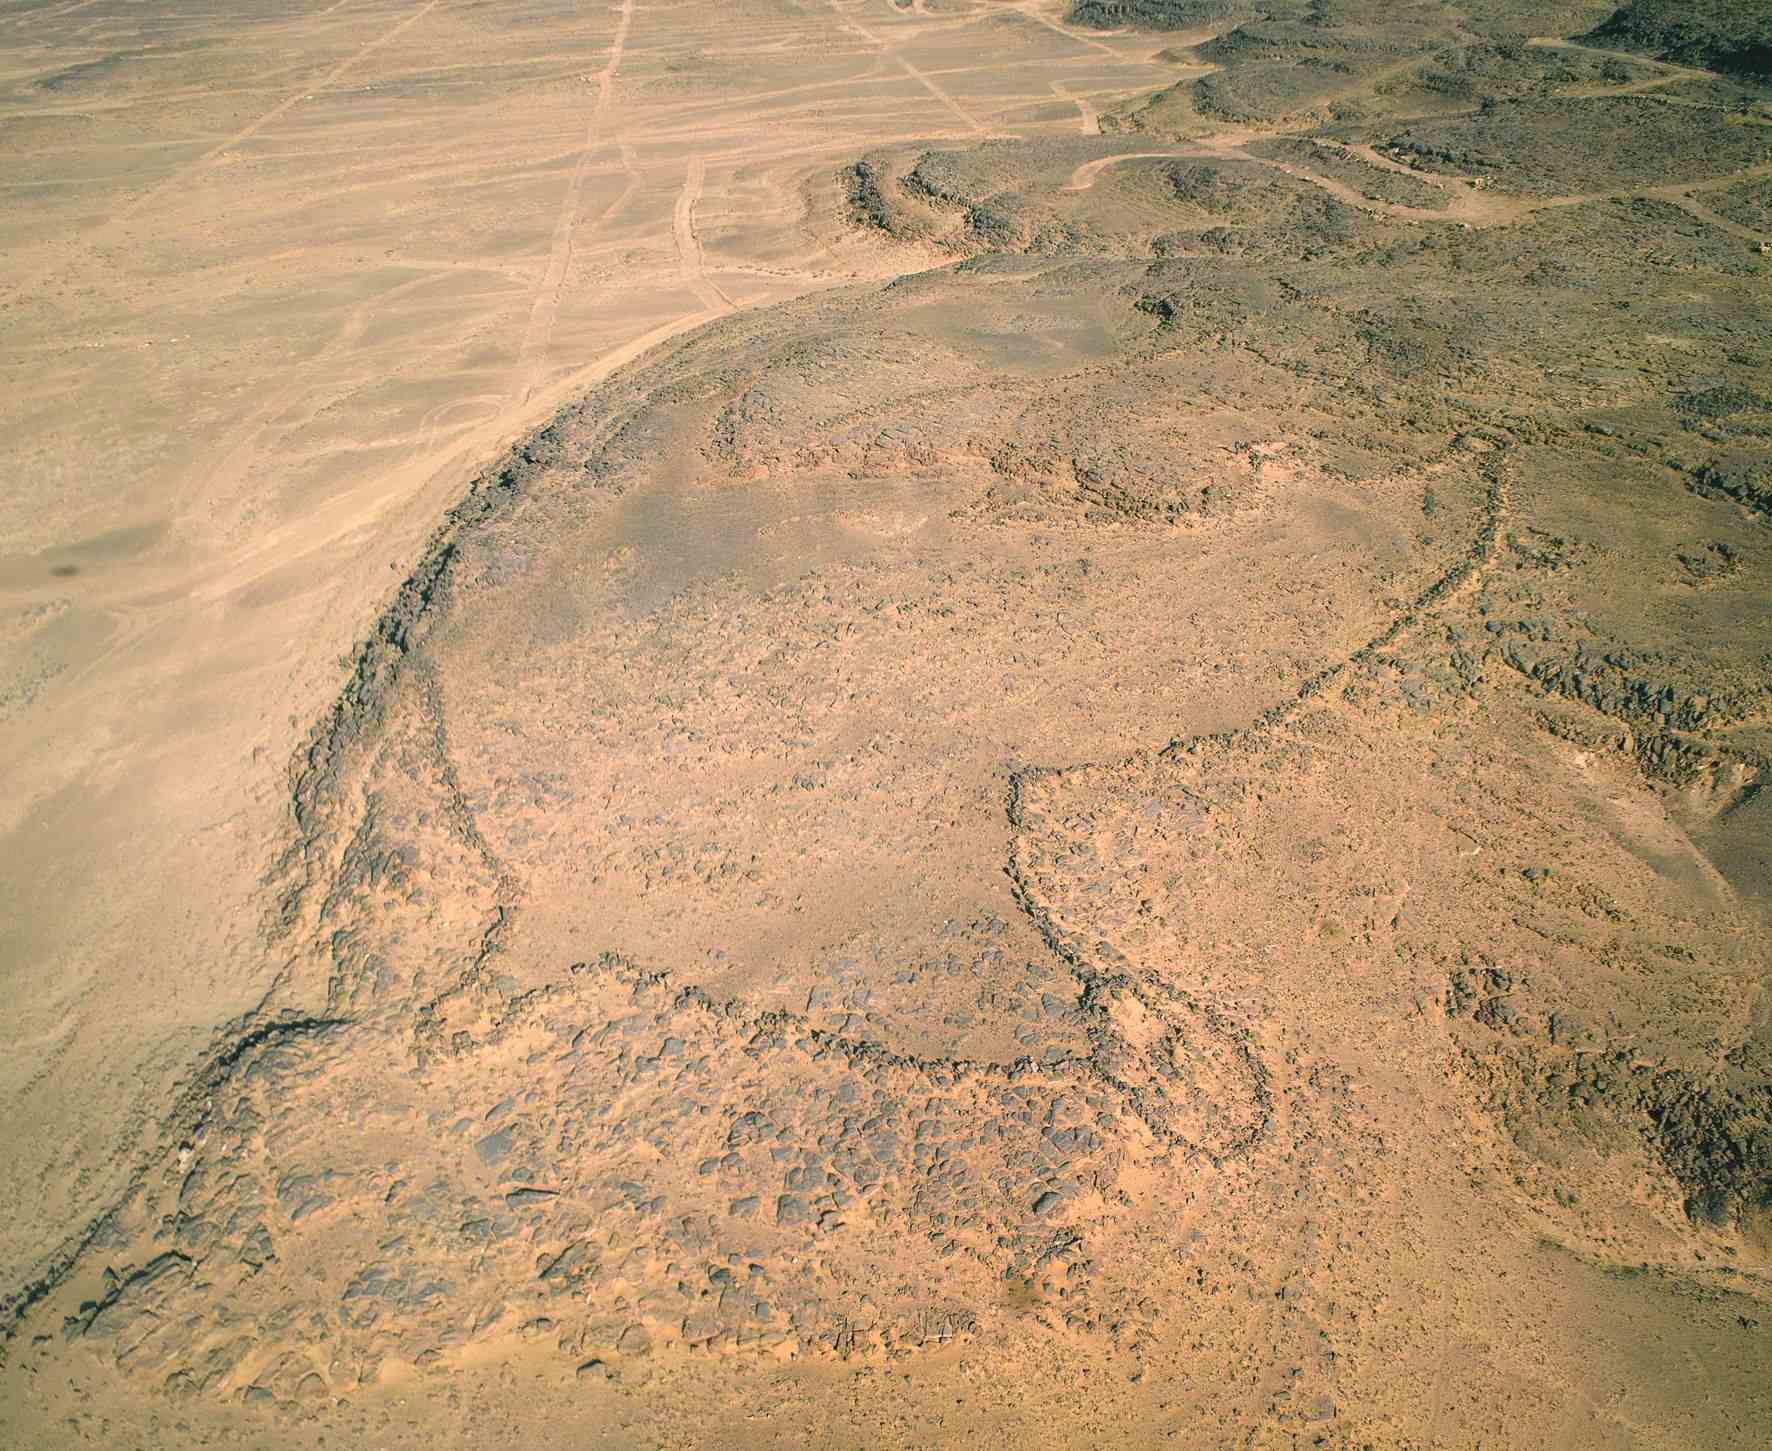 8,000-year-old rock carvings in Arabia may be the world's oldest megastructure blueprints 2